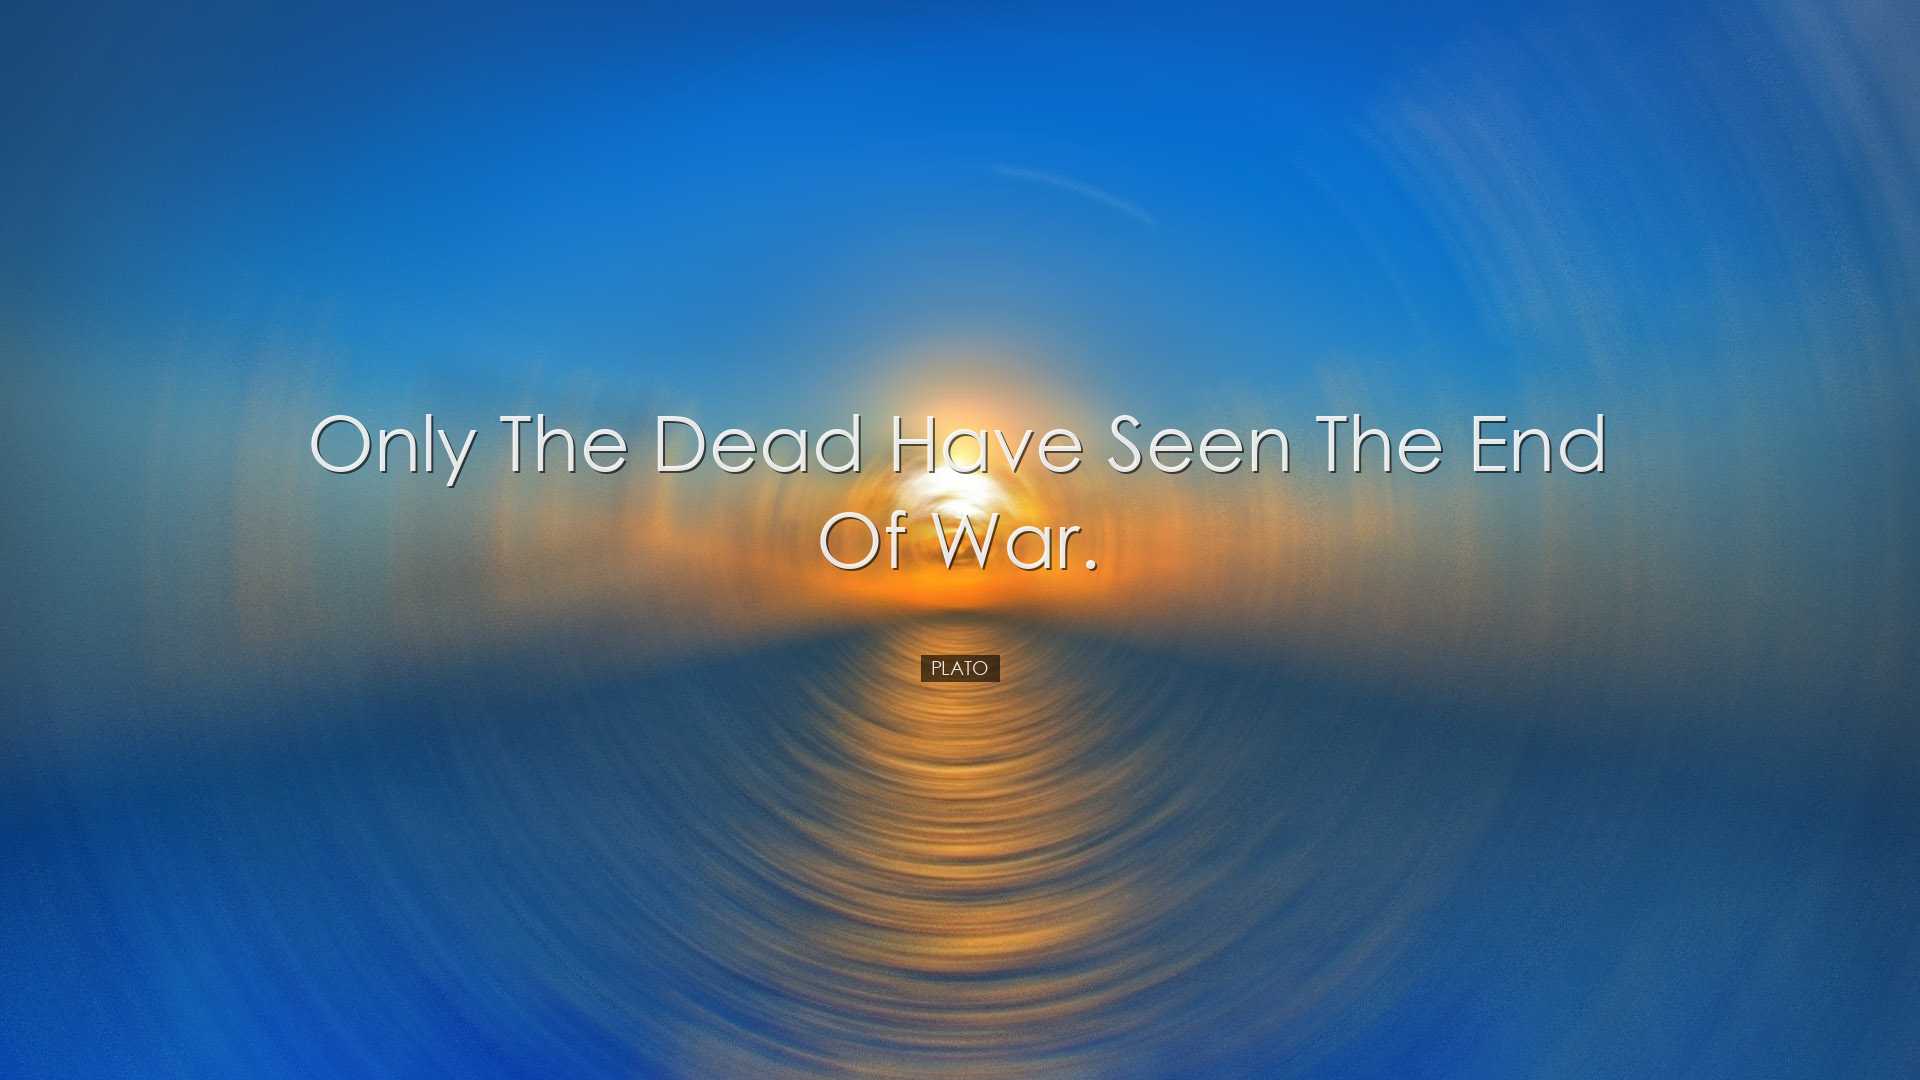 Only the dead have seen the end of war. - Plato